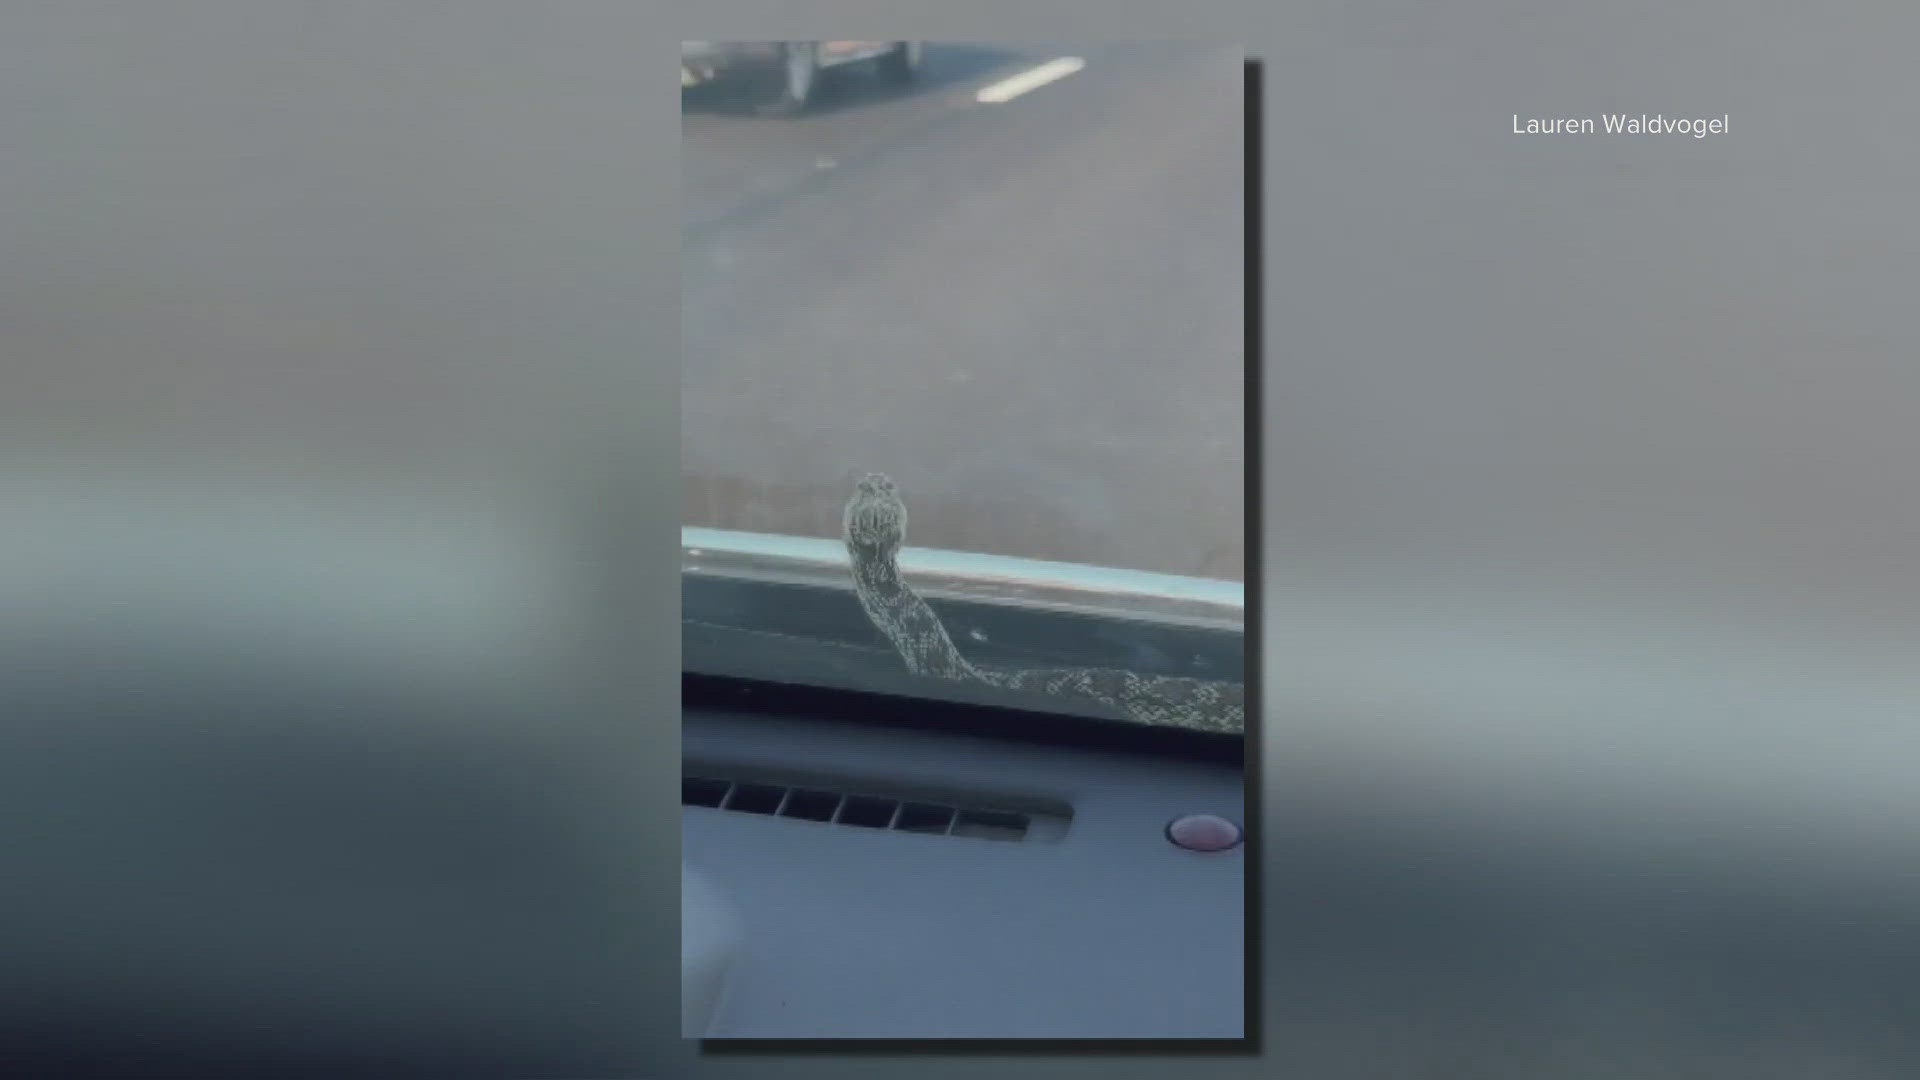 Lauren Waldvogel says she and her husband were driving for almost 45 minutes before she noticed something on the windshield.